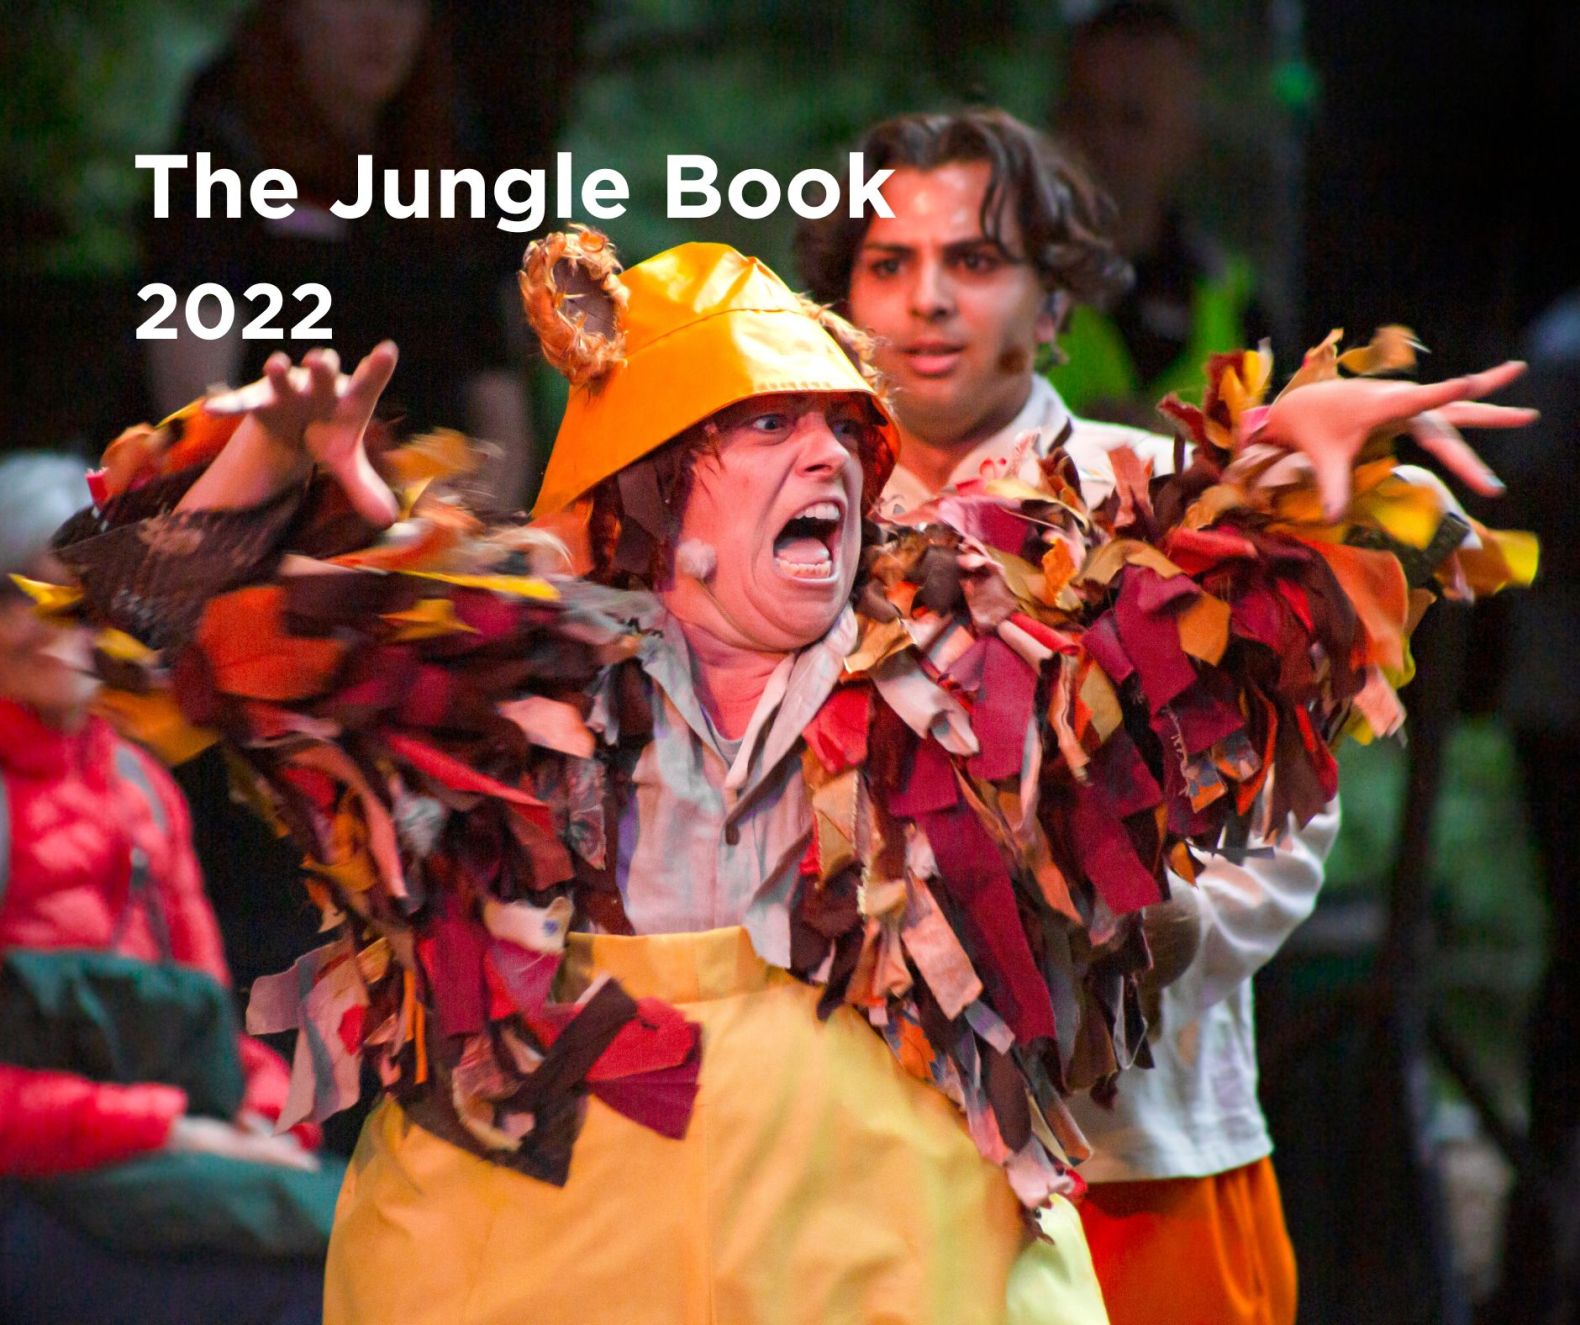 Image from The Jungle Book in 2022